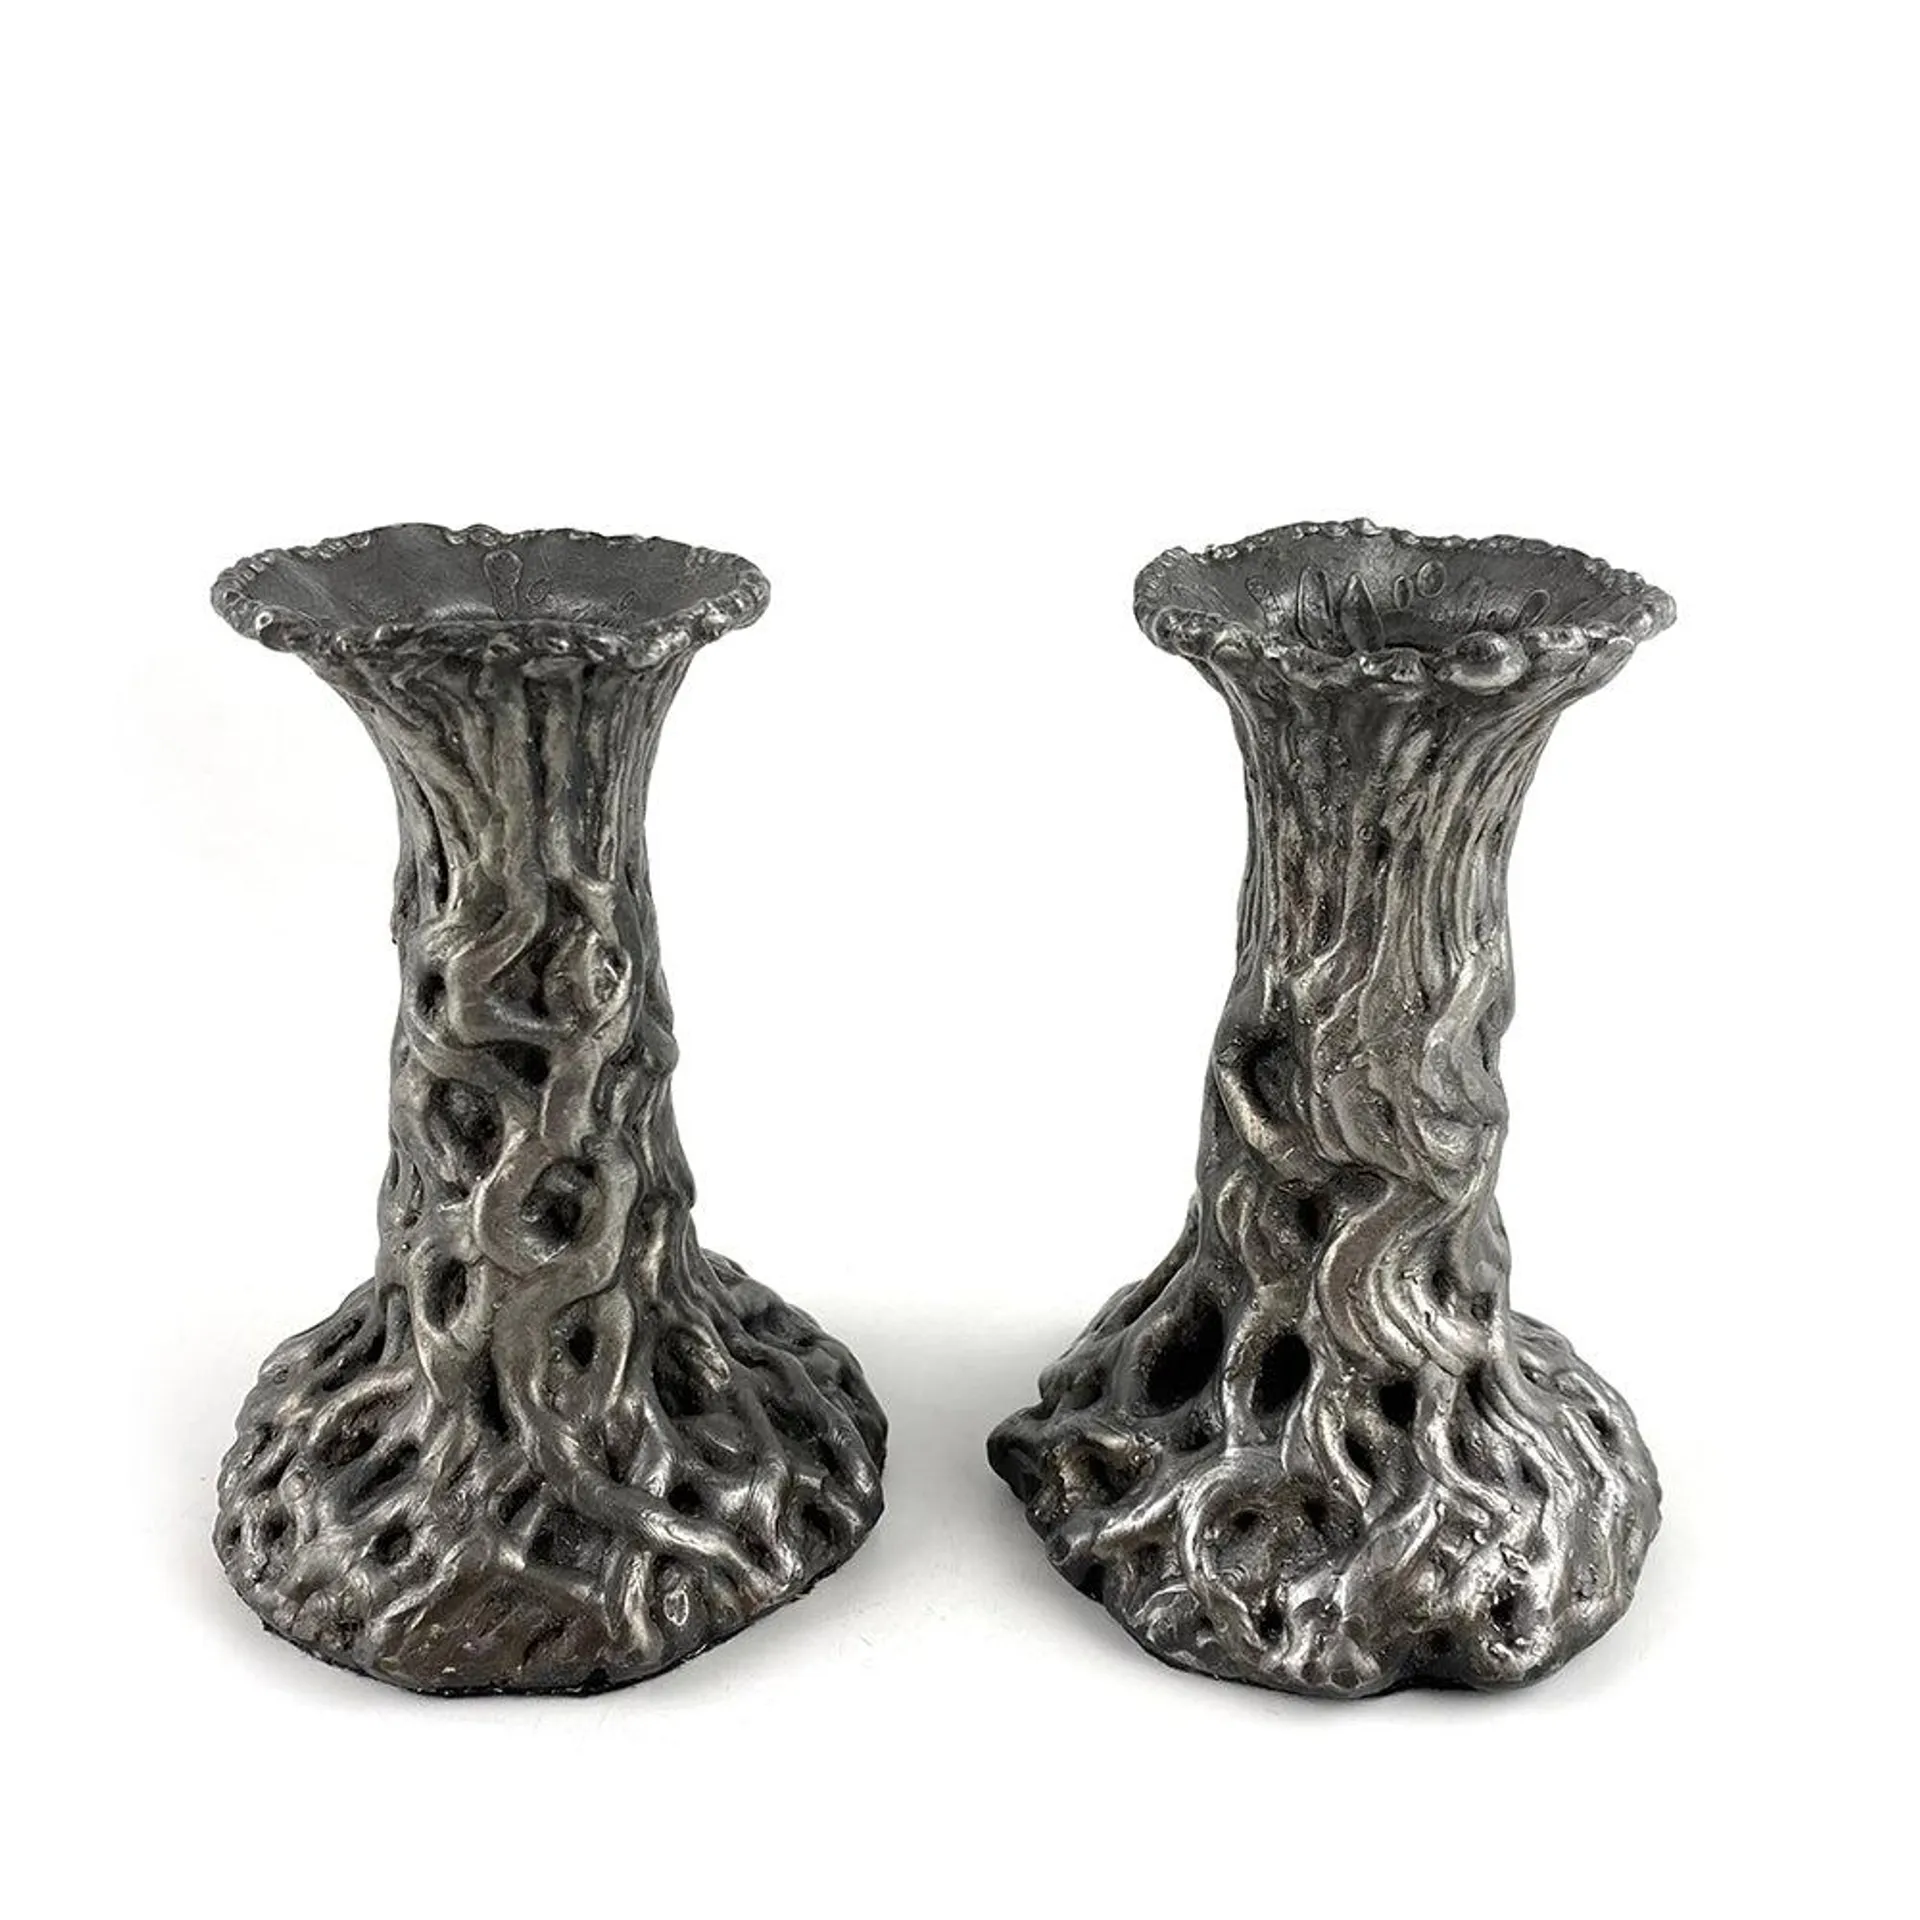 Pair of Small Candlesticks